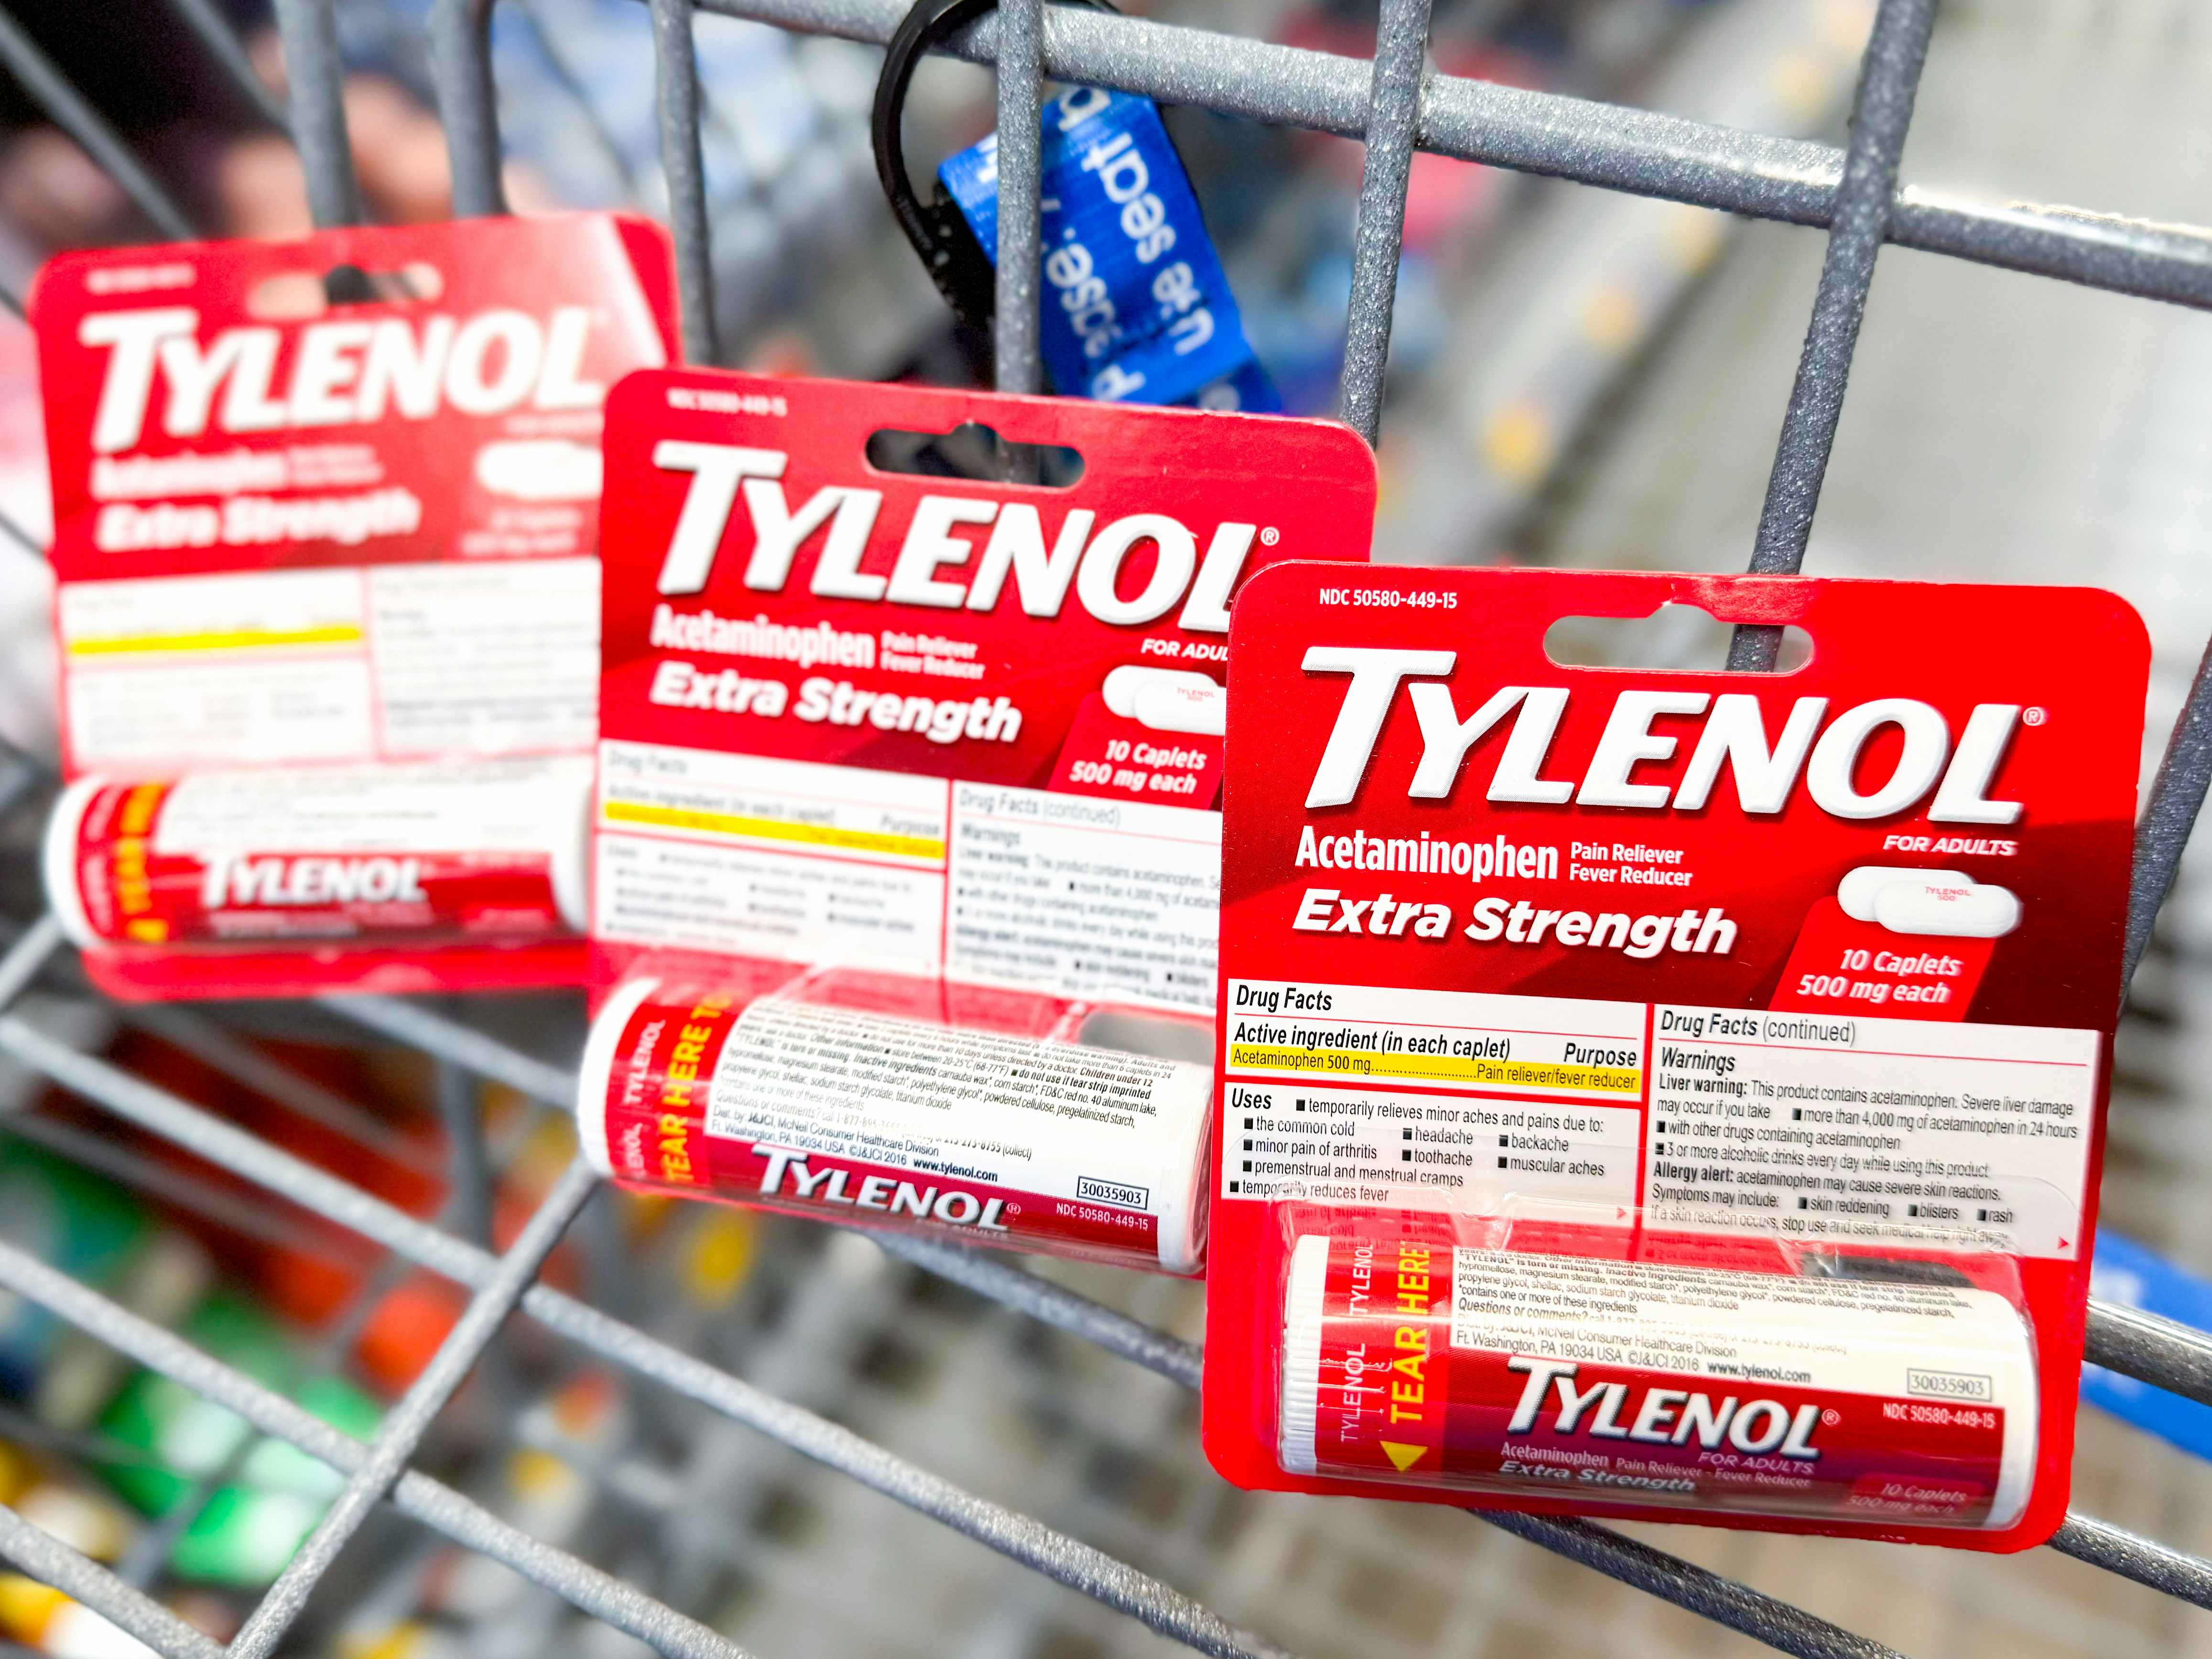 Free Travel-Size Container of Tylenol Extra Strength at Walmart